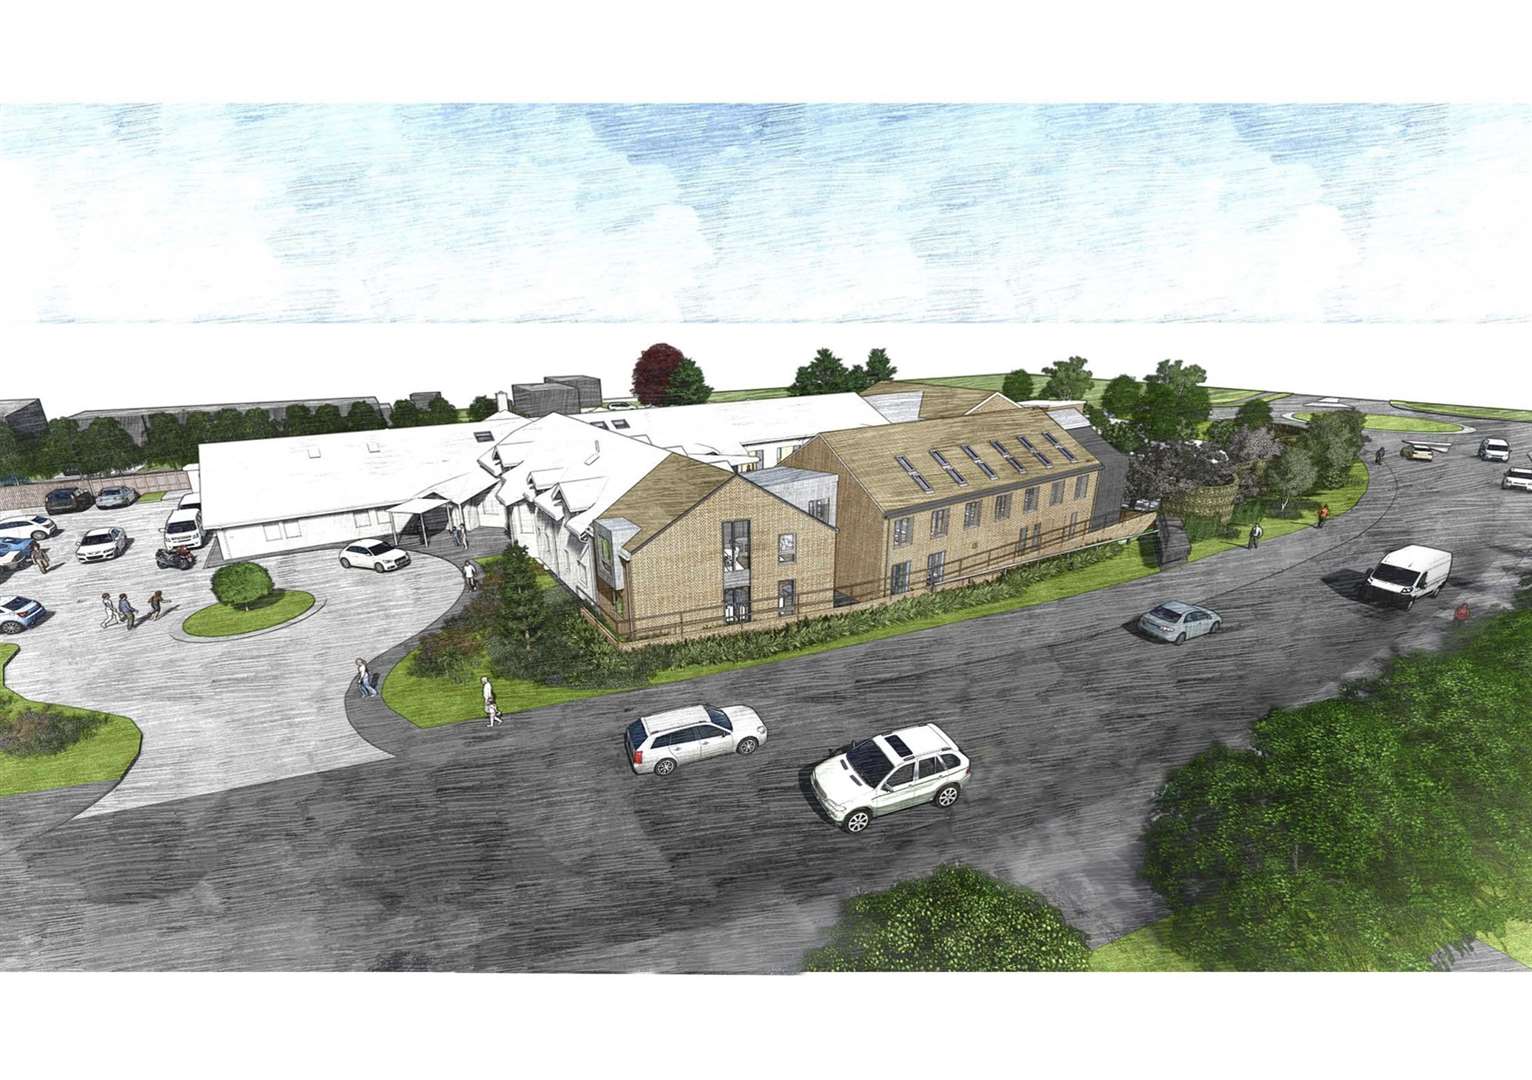 ellenor Hospice, in Northfleet, is extending the building. This is an artist's impression of the upgraded facilities.